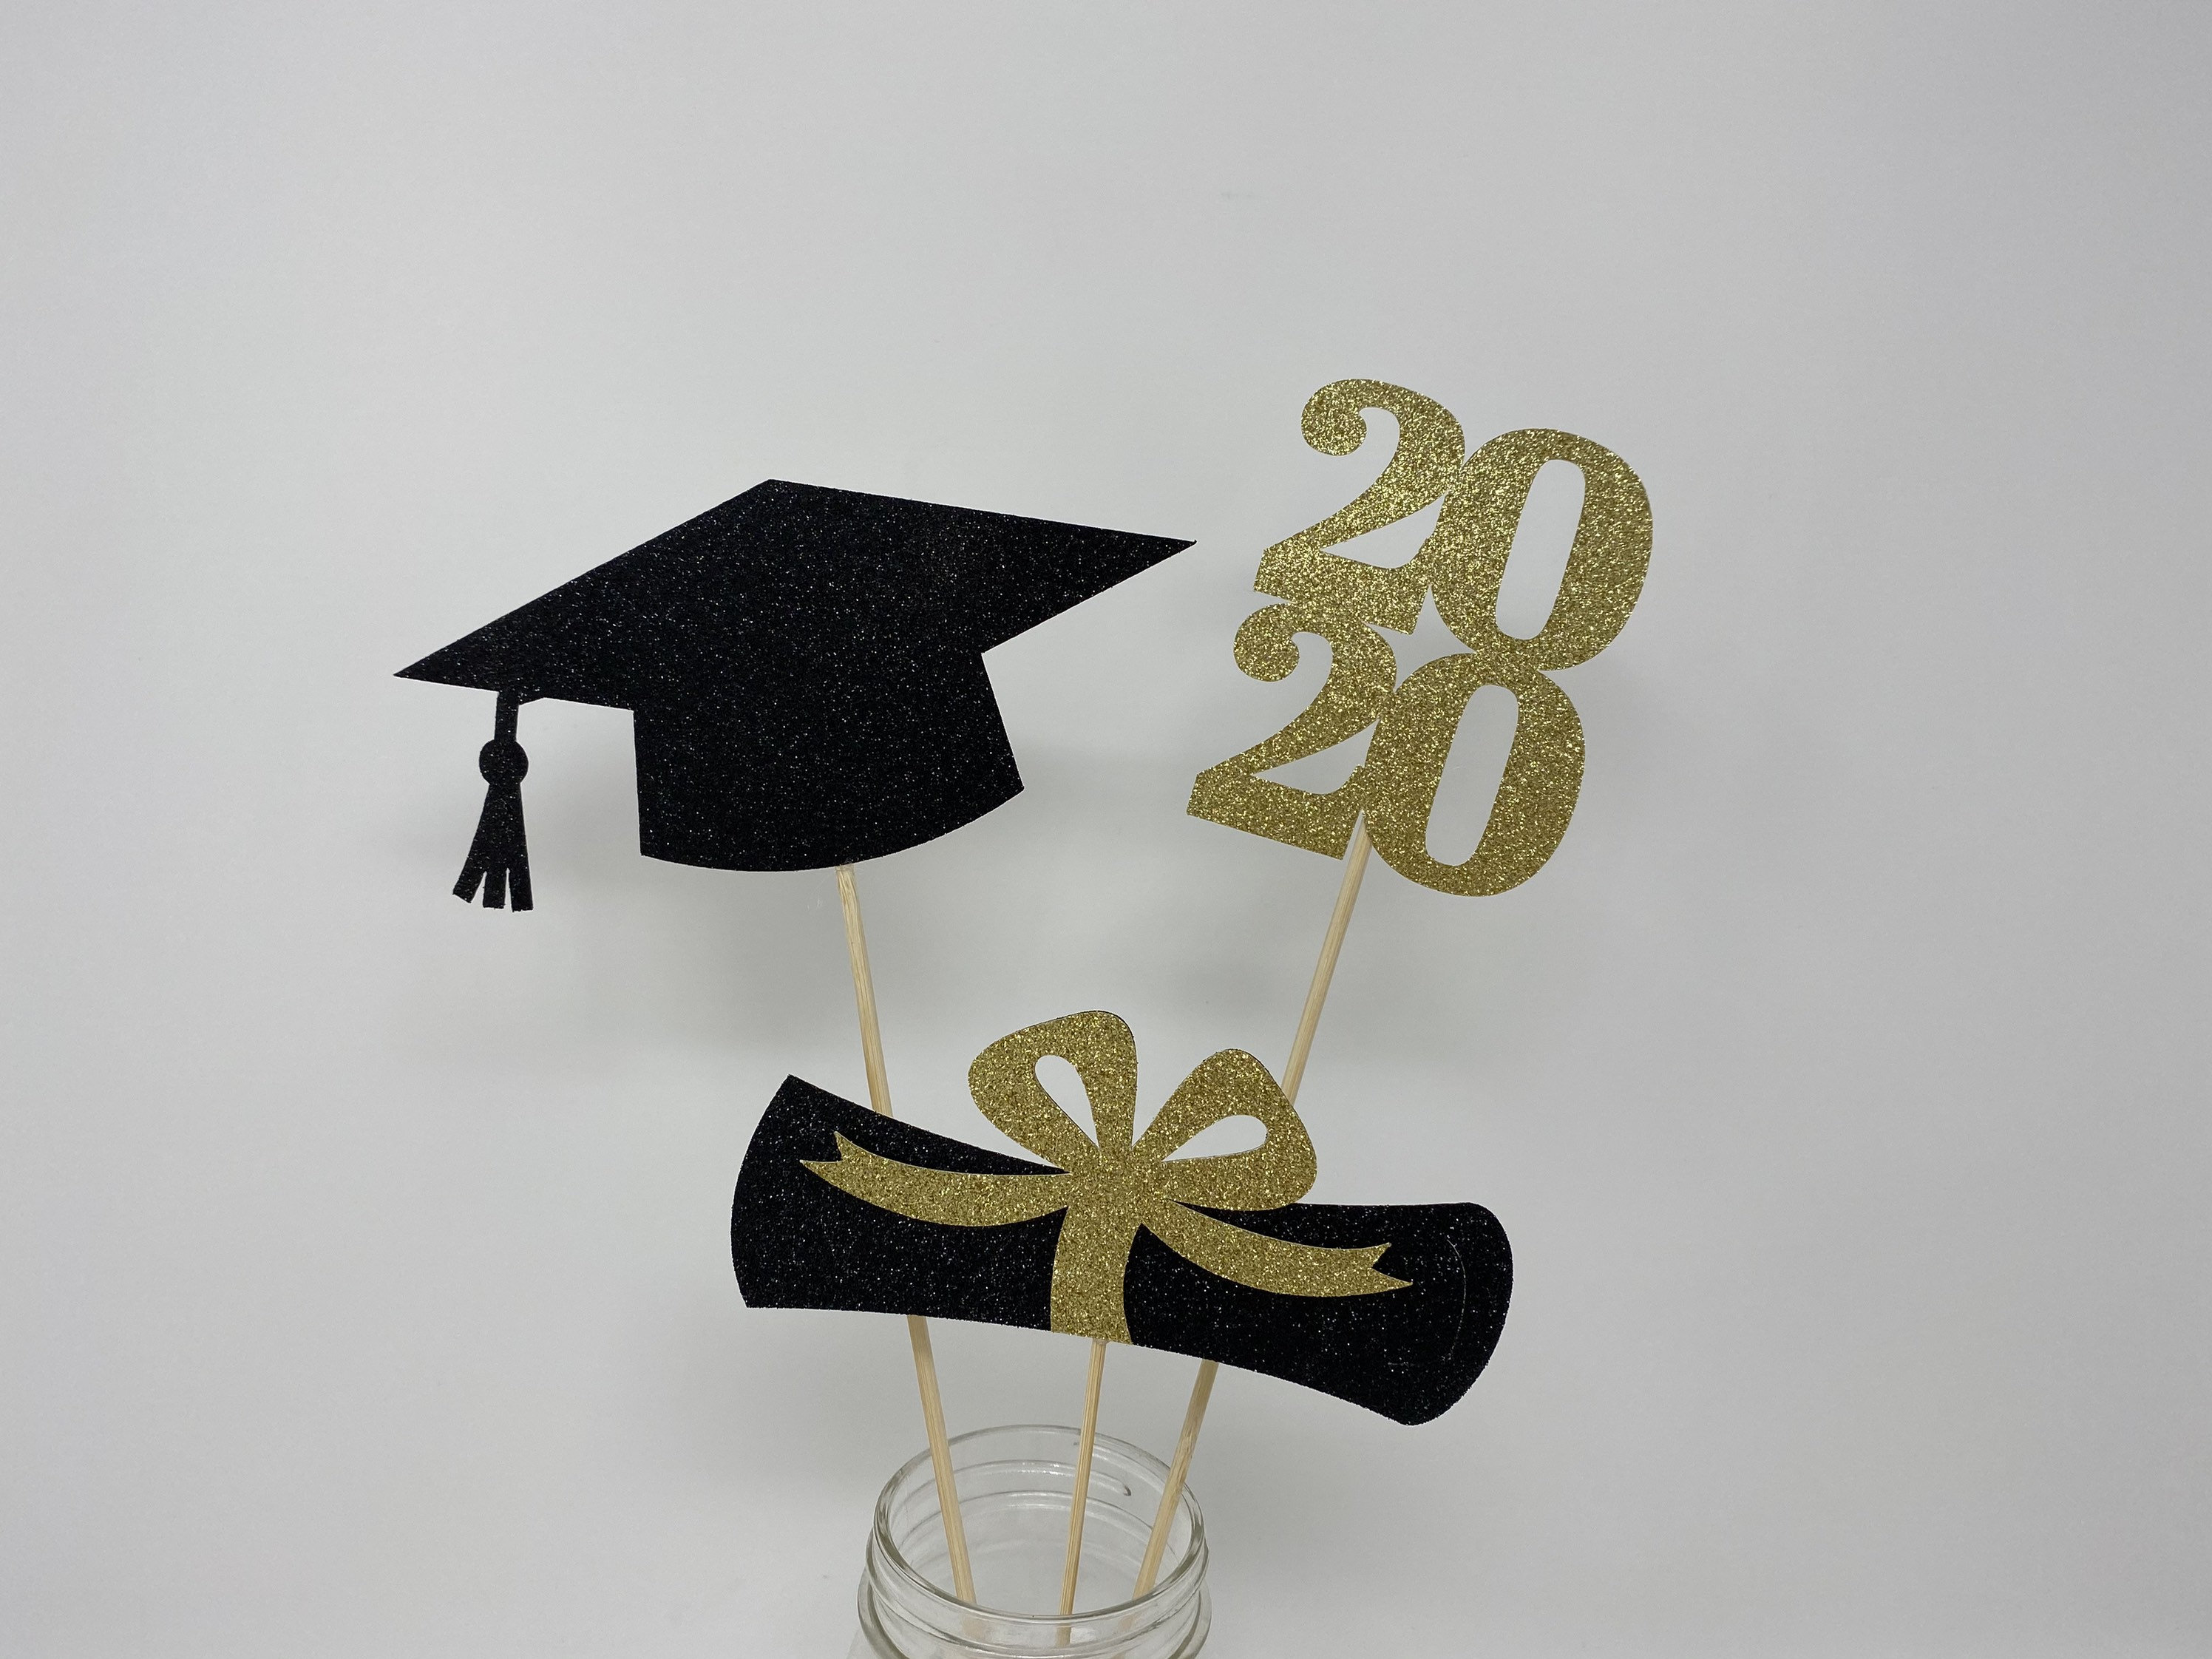 30 Pieces Large Glitter Graduation Centerpiece Sticks 2021 Congrats Grad Party Centerpiece Sticks Graduation Table Toppers for Class of 2021 High School College Graduation Party Decoration Supplies 